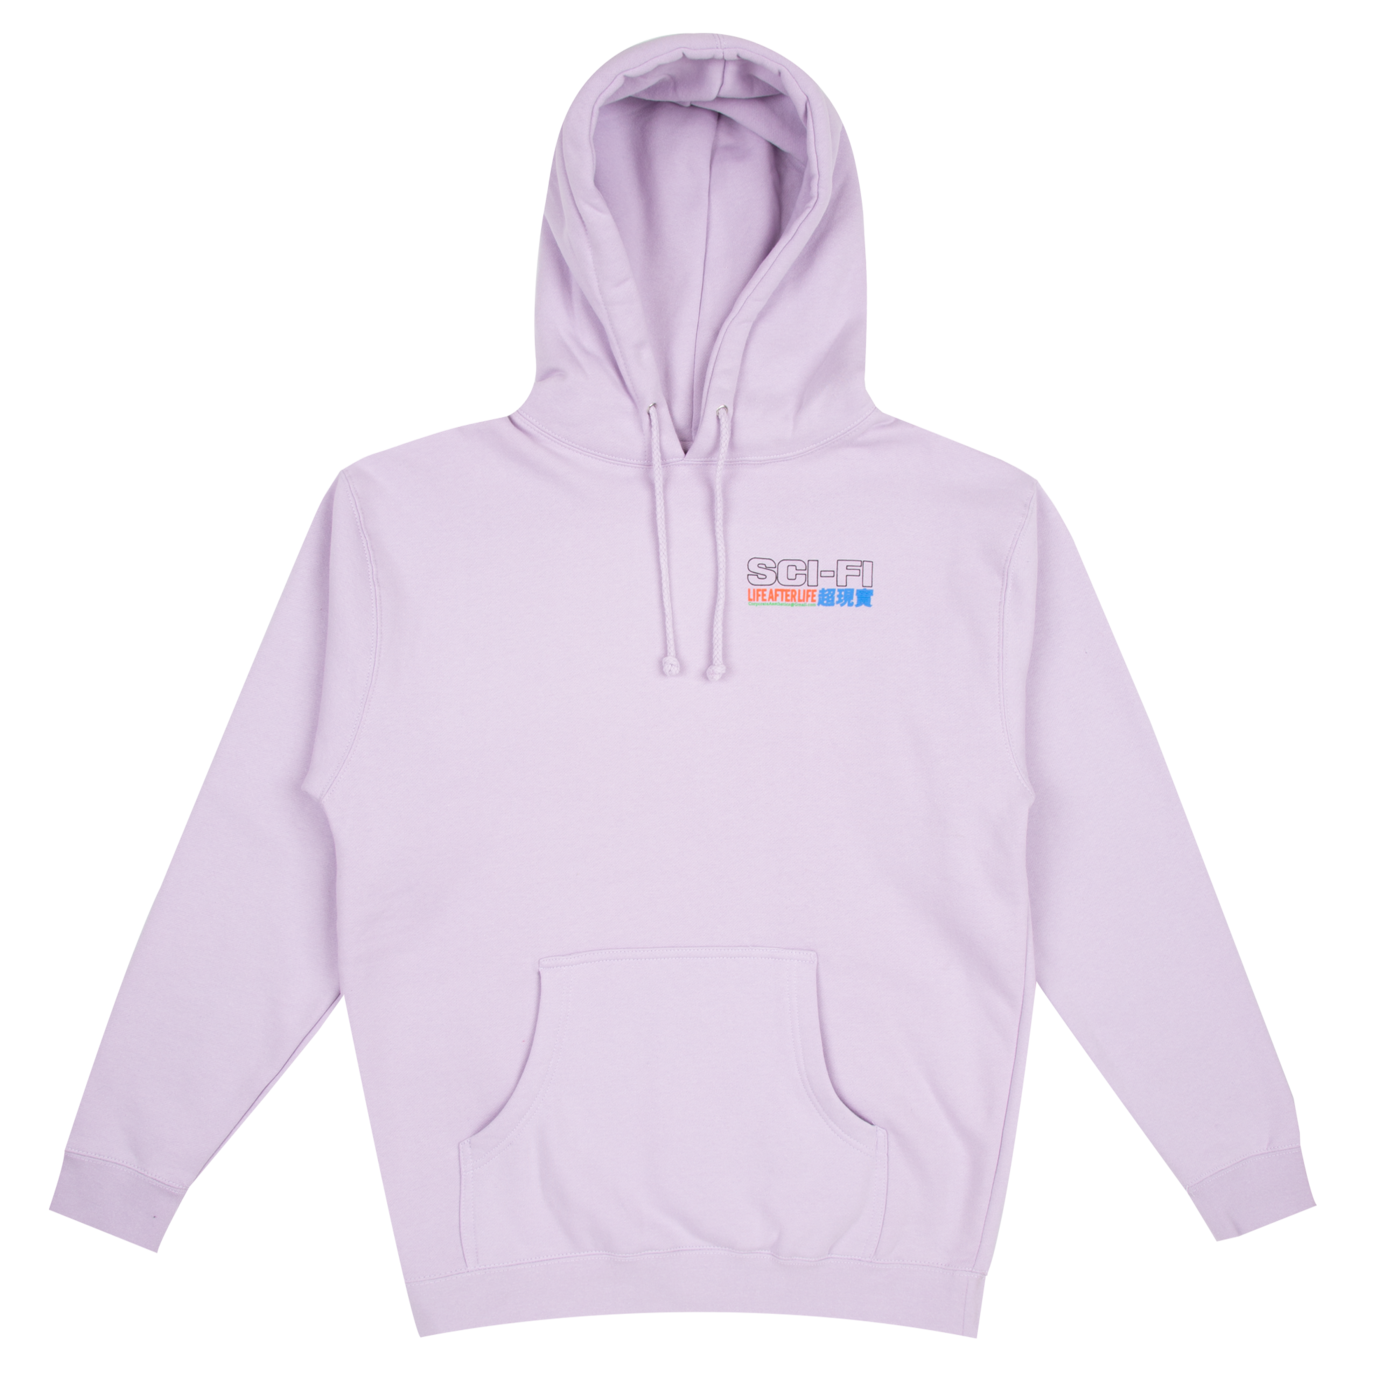 SCI-FI FANTASY LIFE AFTER LIFE HOODIE - LAVENDER